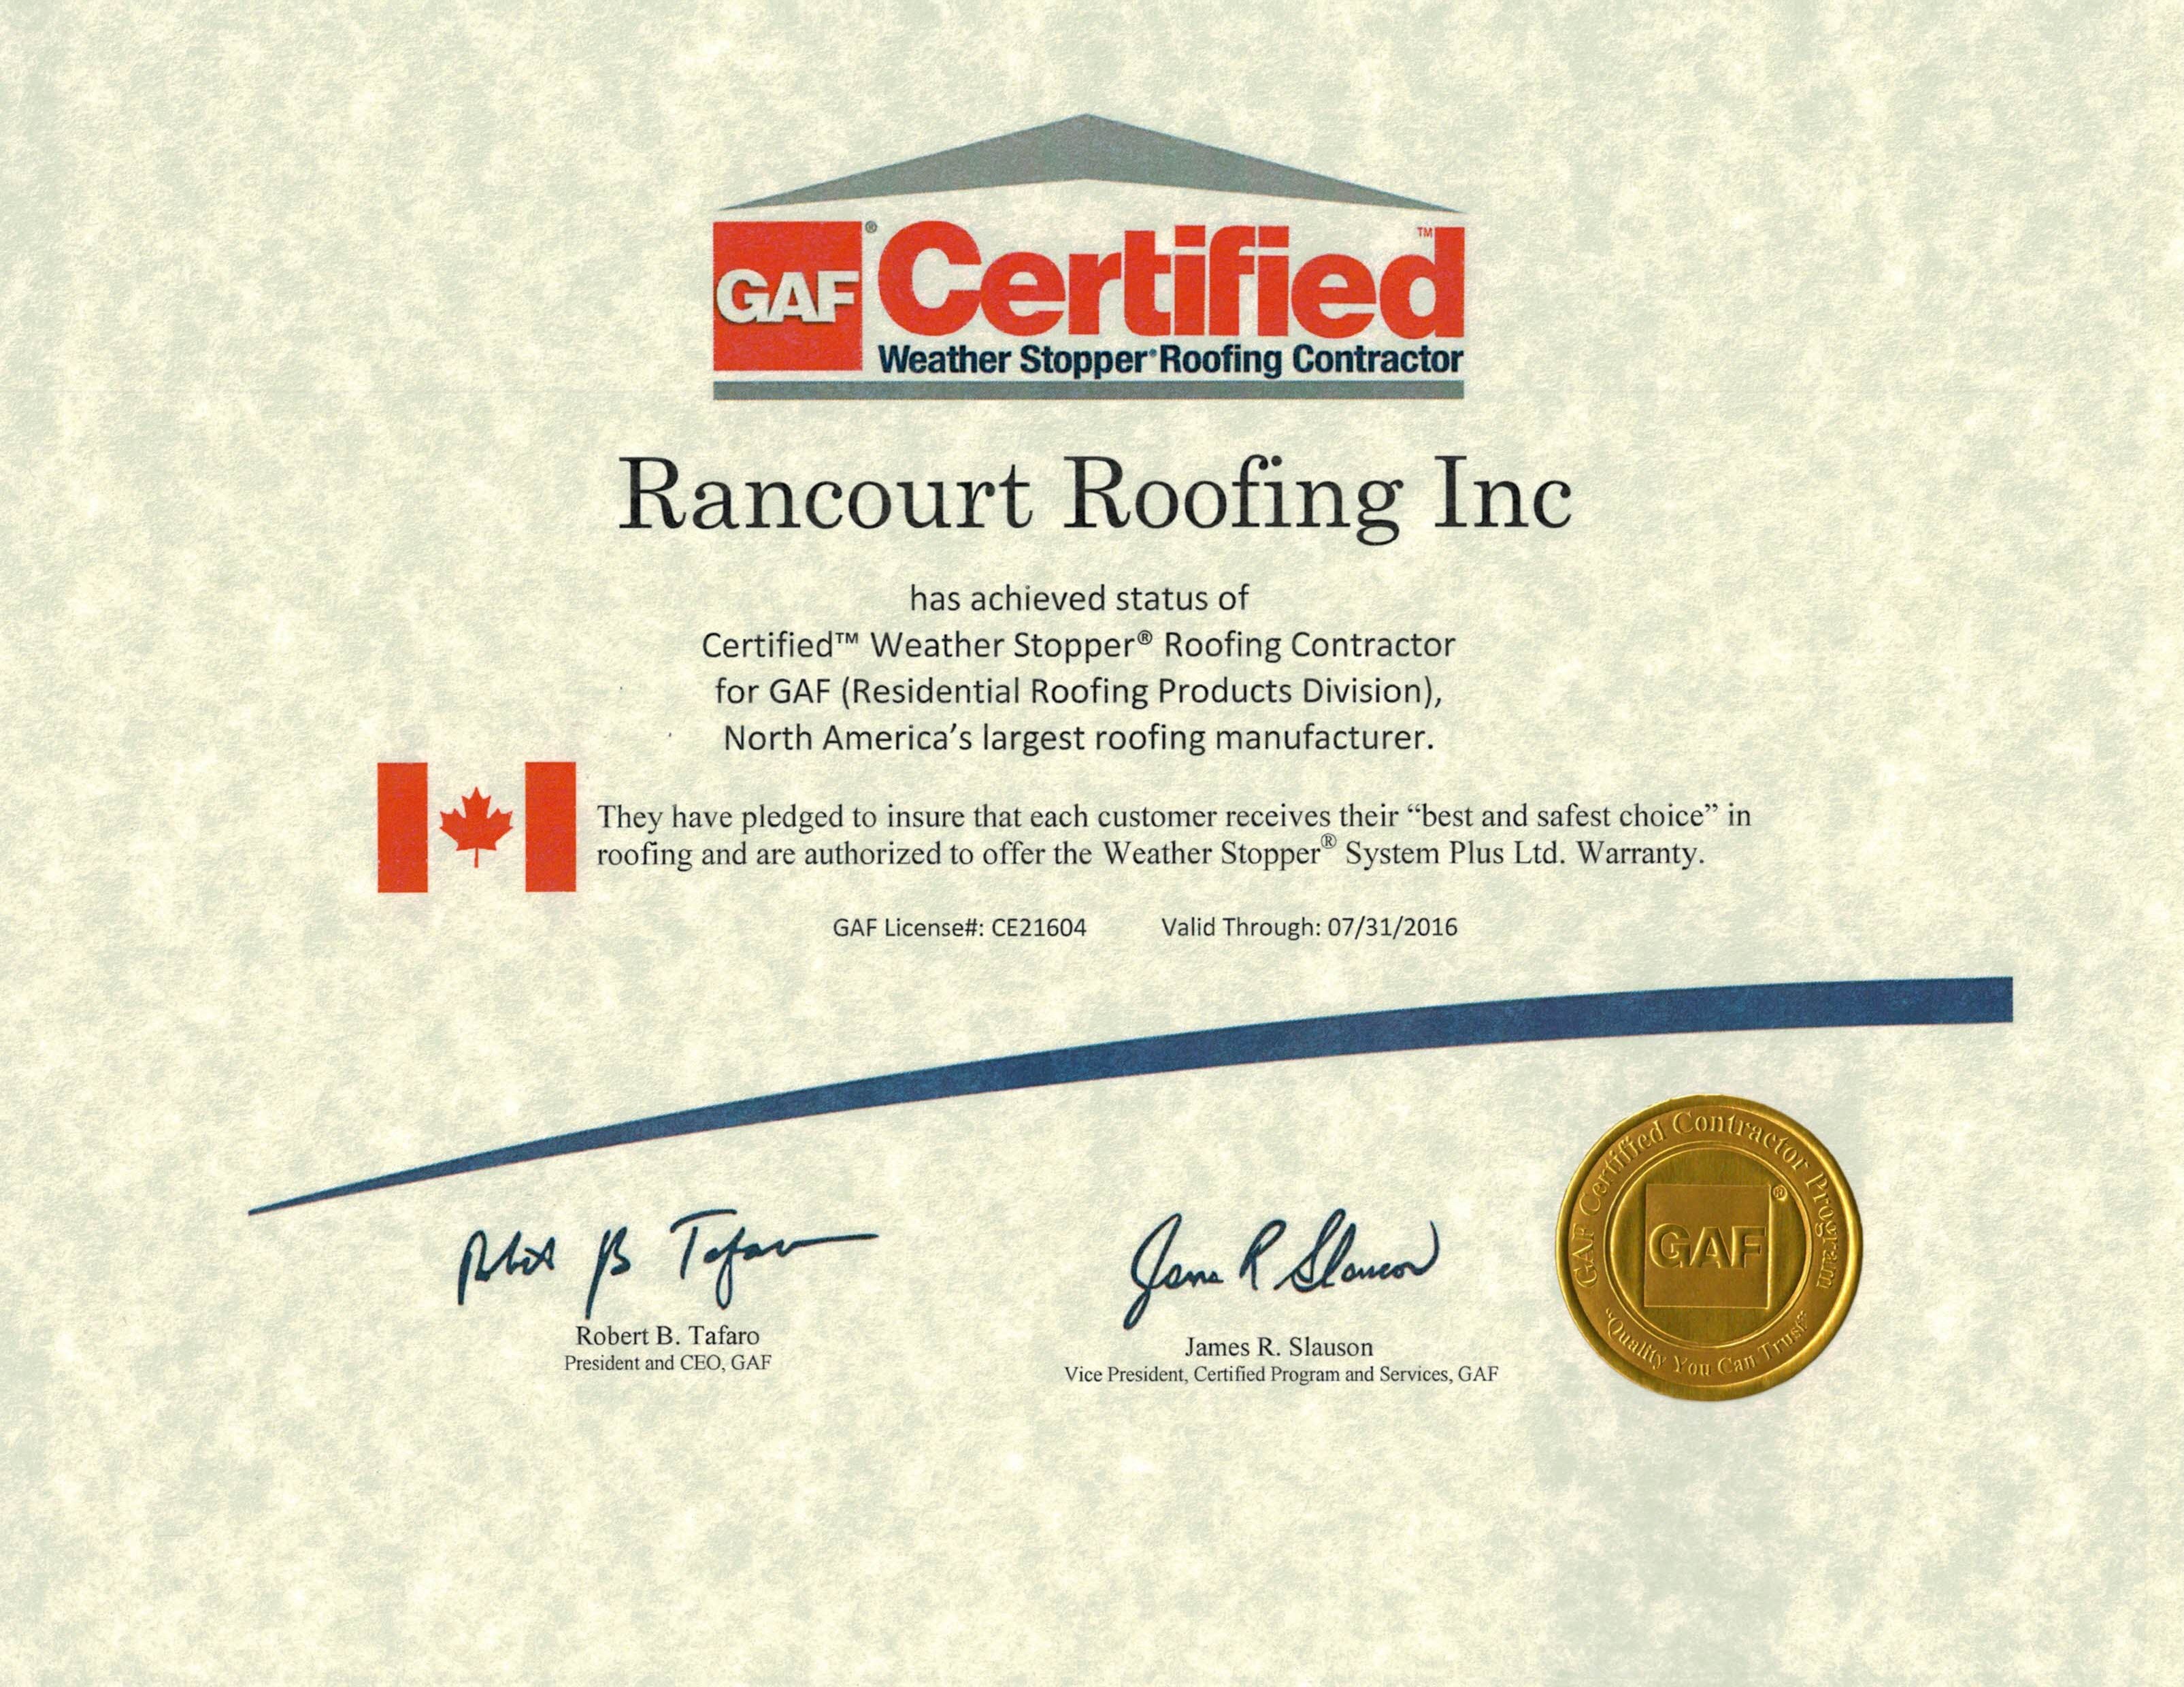 Rancourt Roofing GAF certified weather stopper roofing contractor